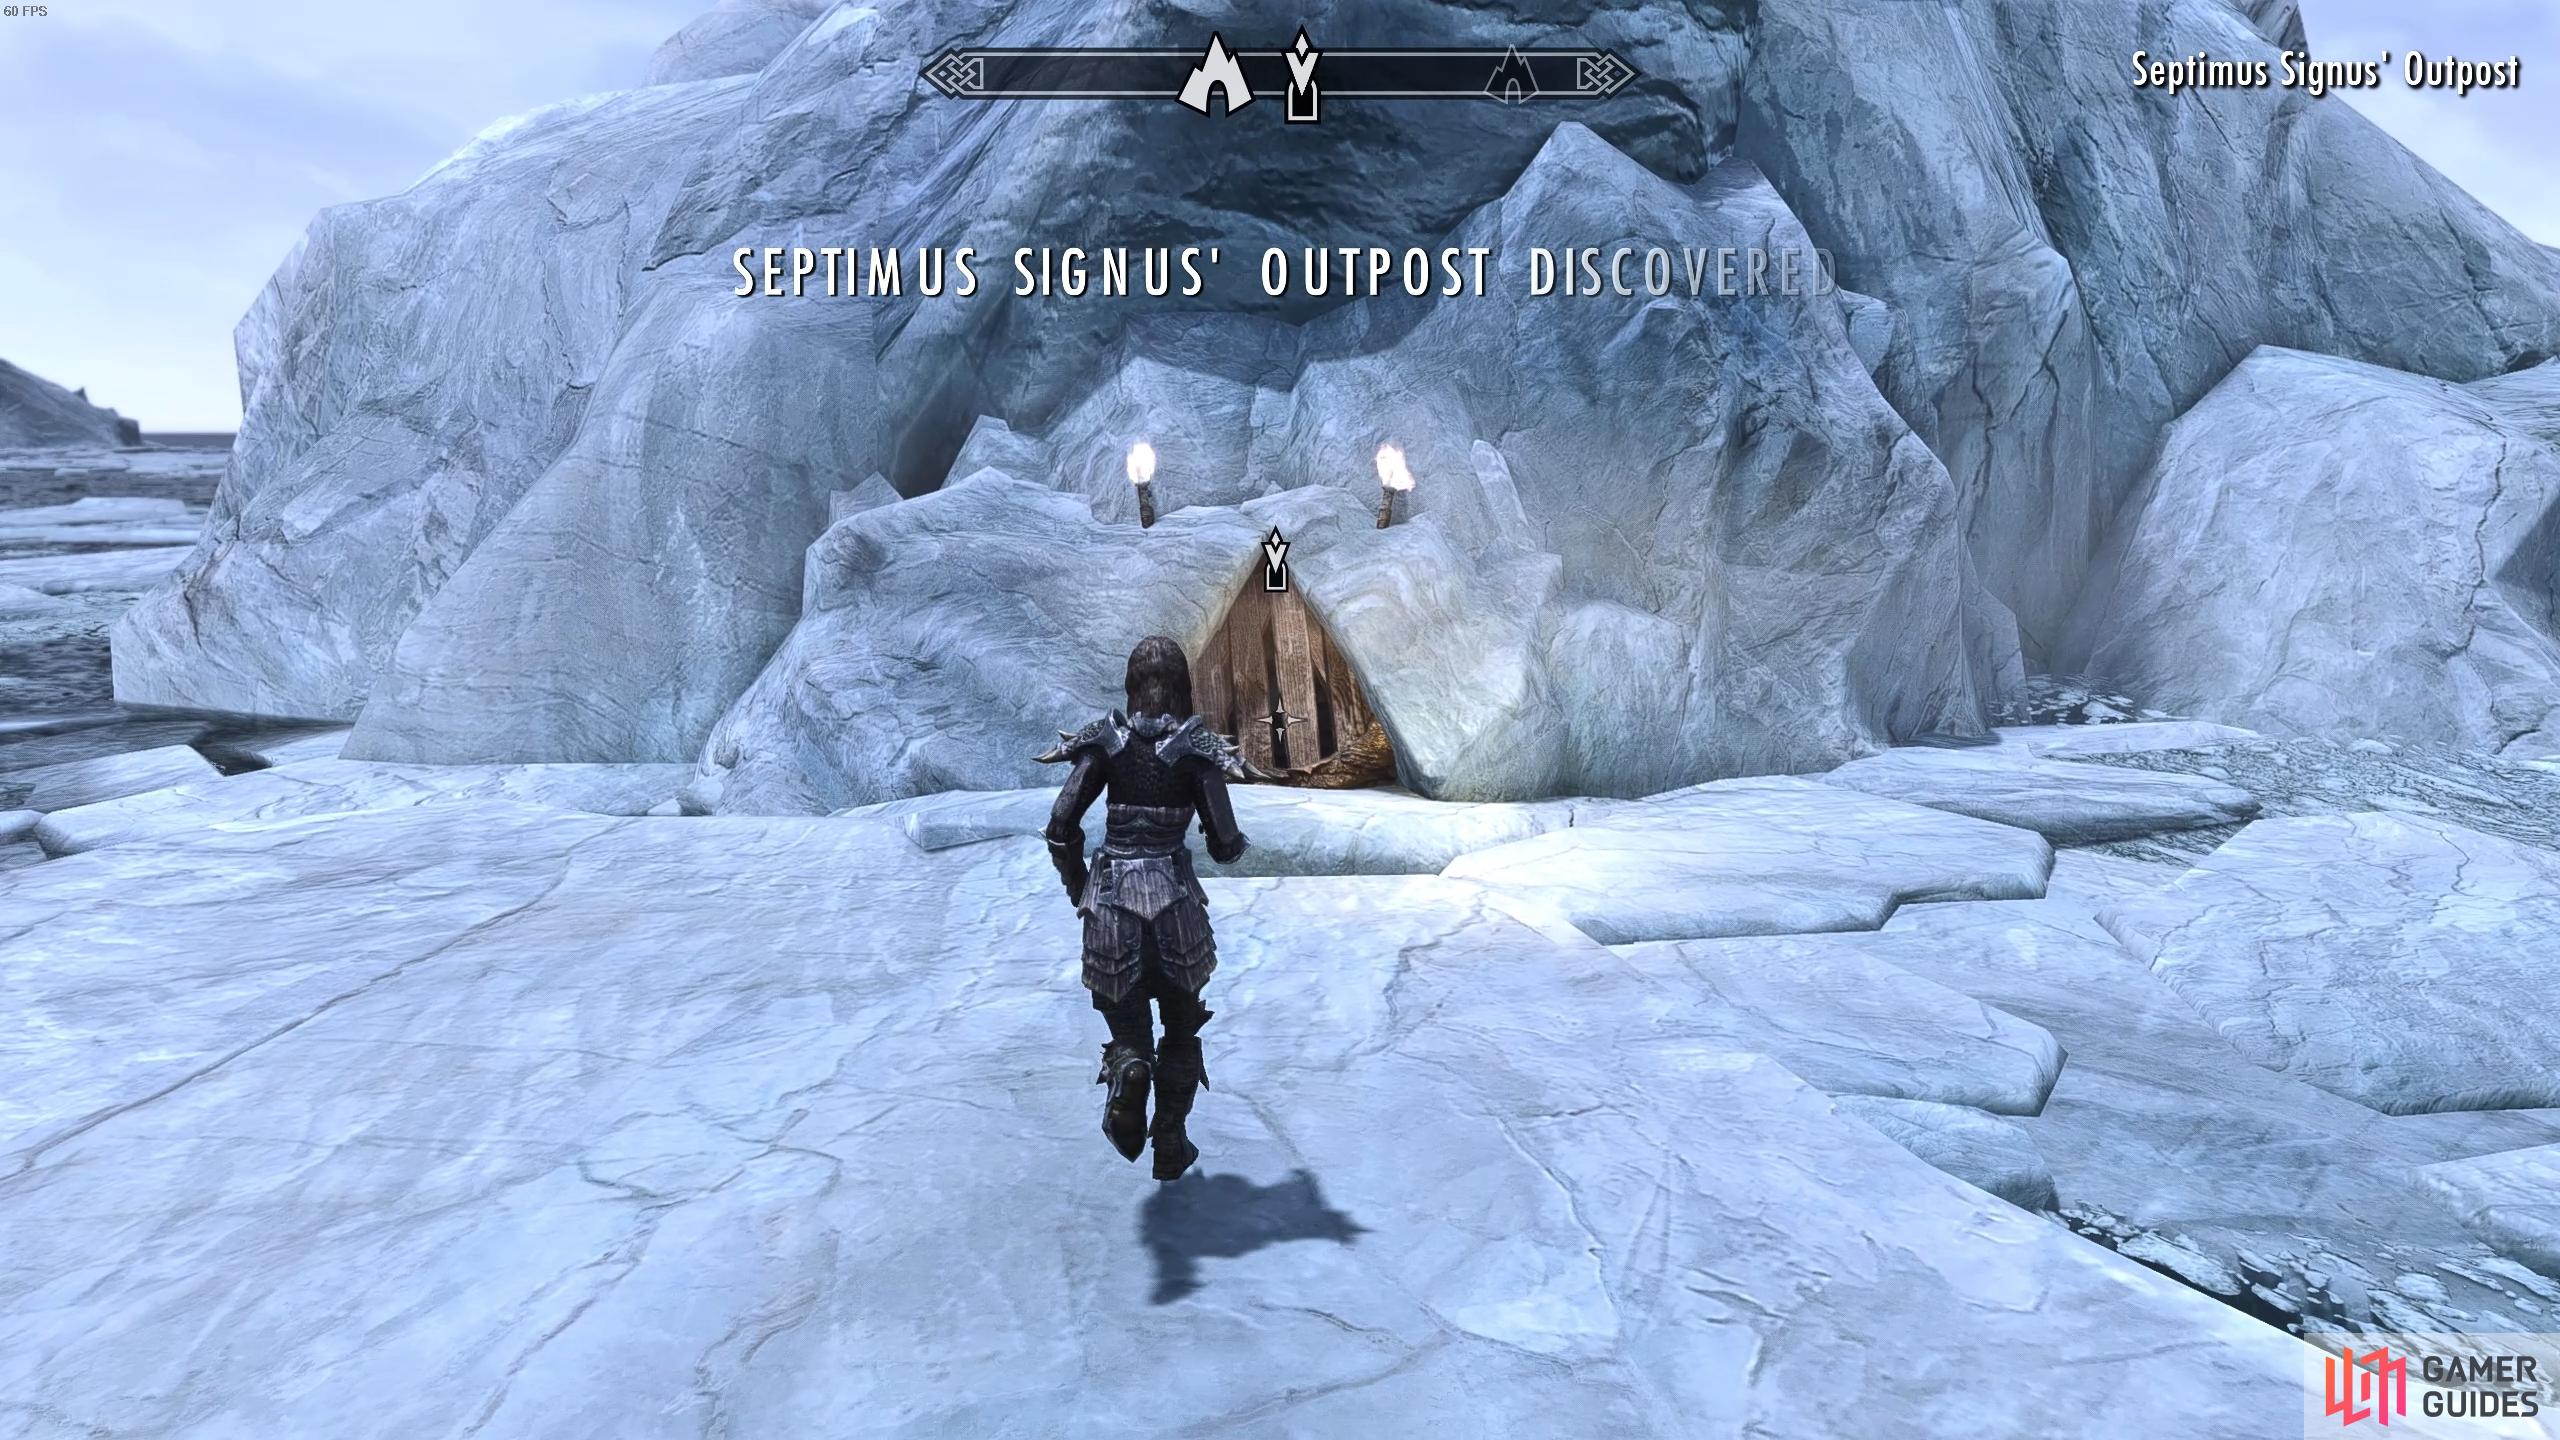 You'll need to find the outpost of Septimus Signus in the ice fields north of Winterhold.